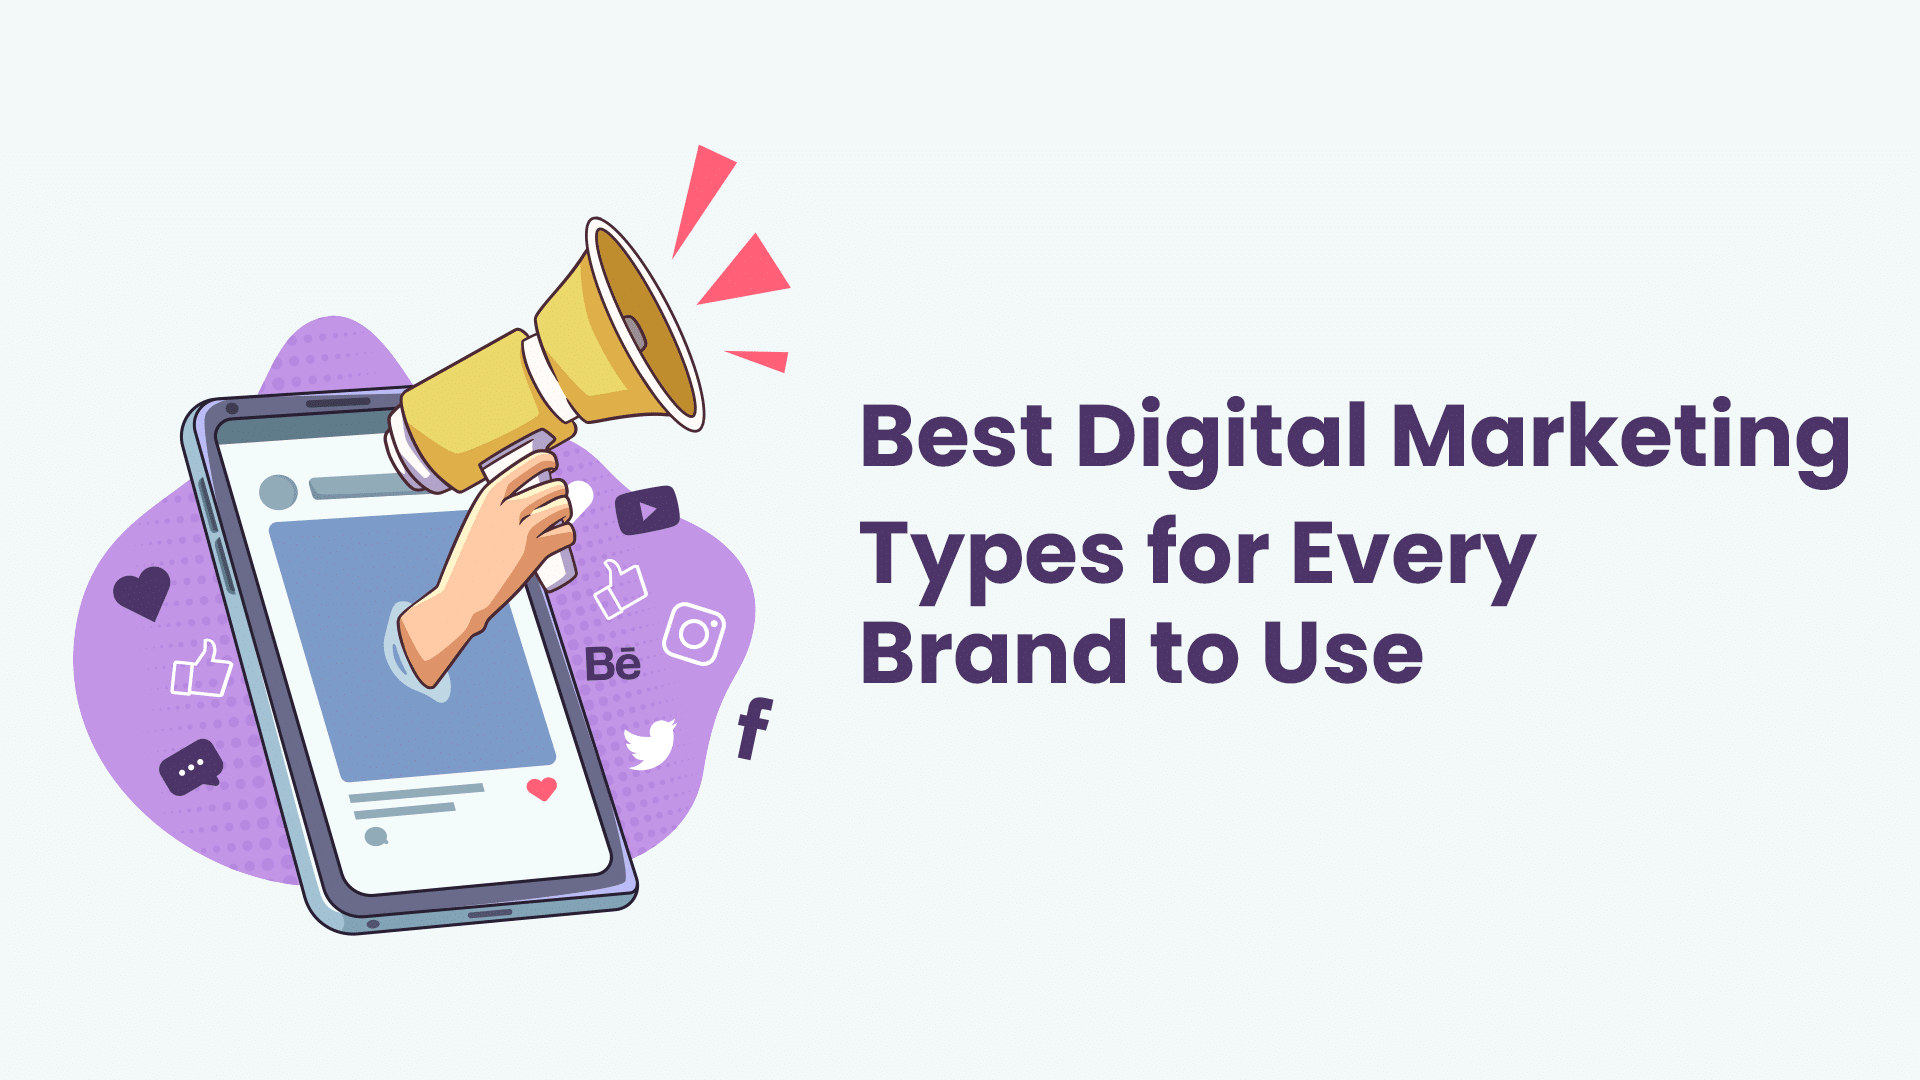 Know what are the Digital Marketing Types companies can use